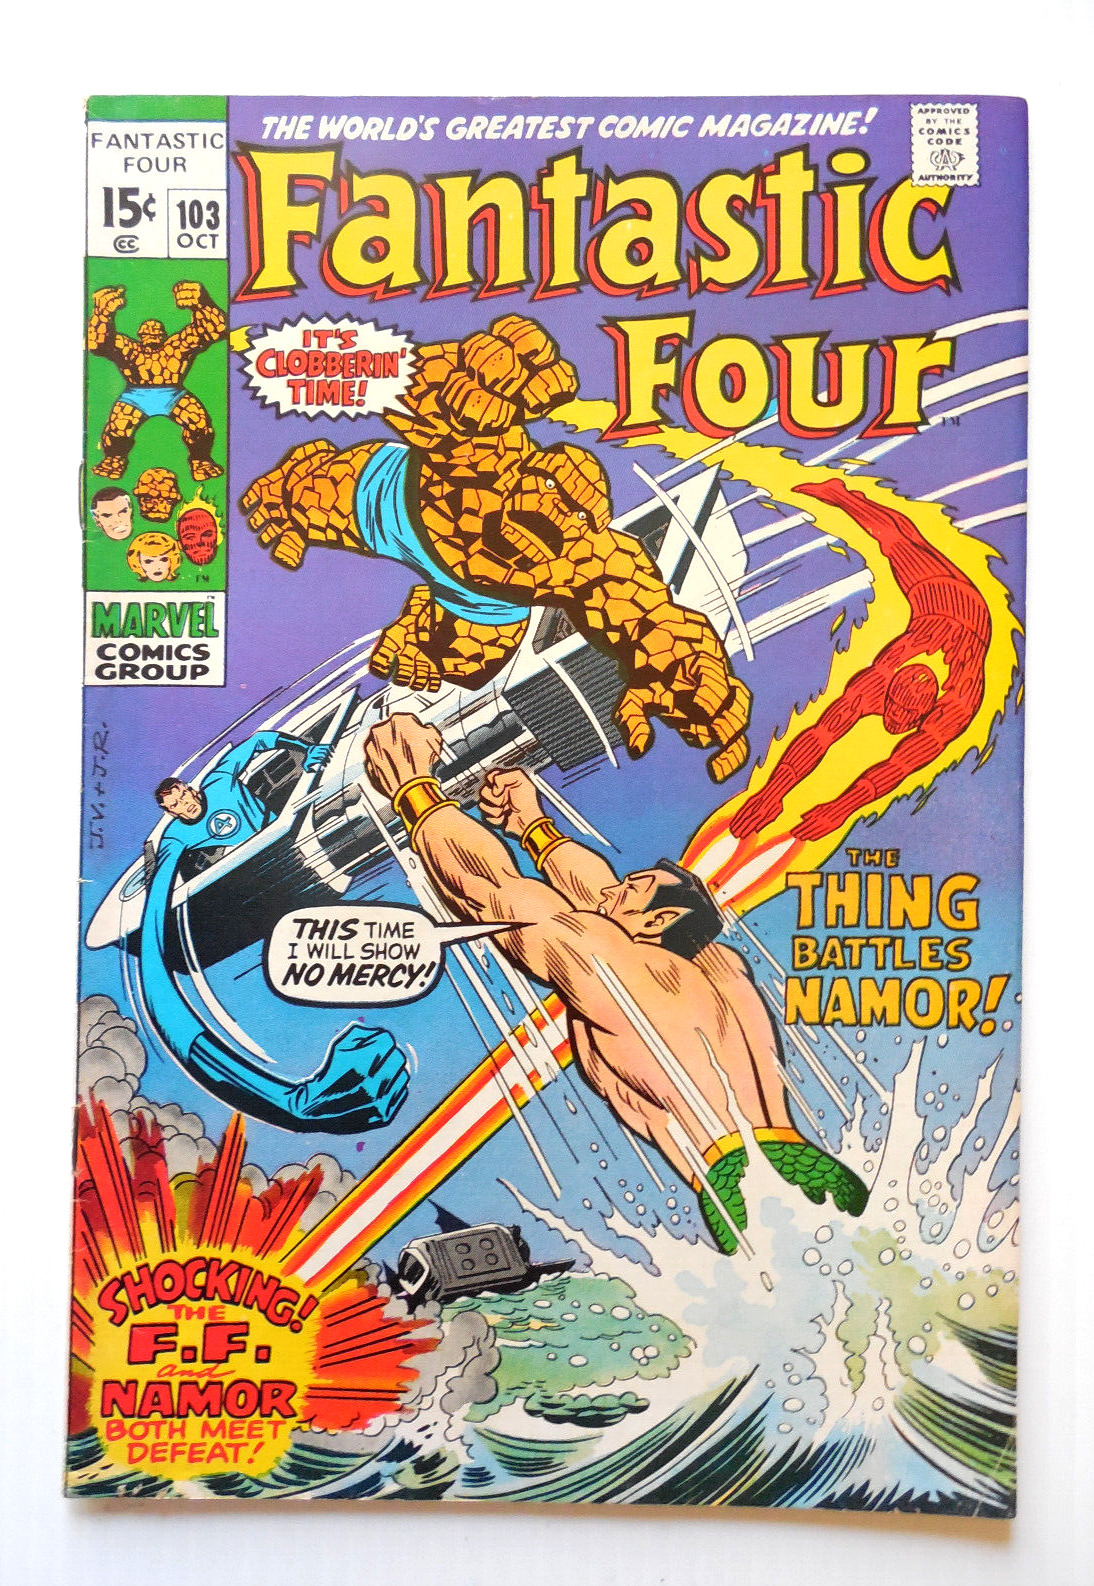 FANTASTIC FOUR NUMBER 103 BRONZE AGE 1970 VOLUME 1  KEY ISSUE  AGATHA HARKNESS